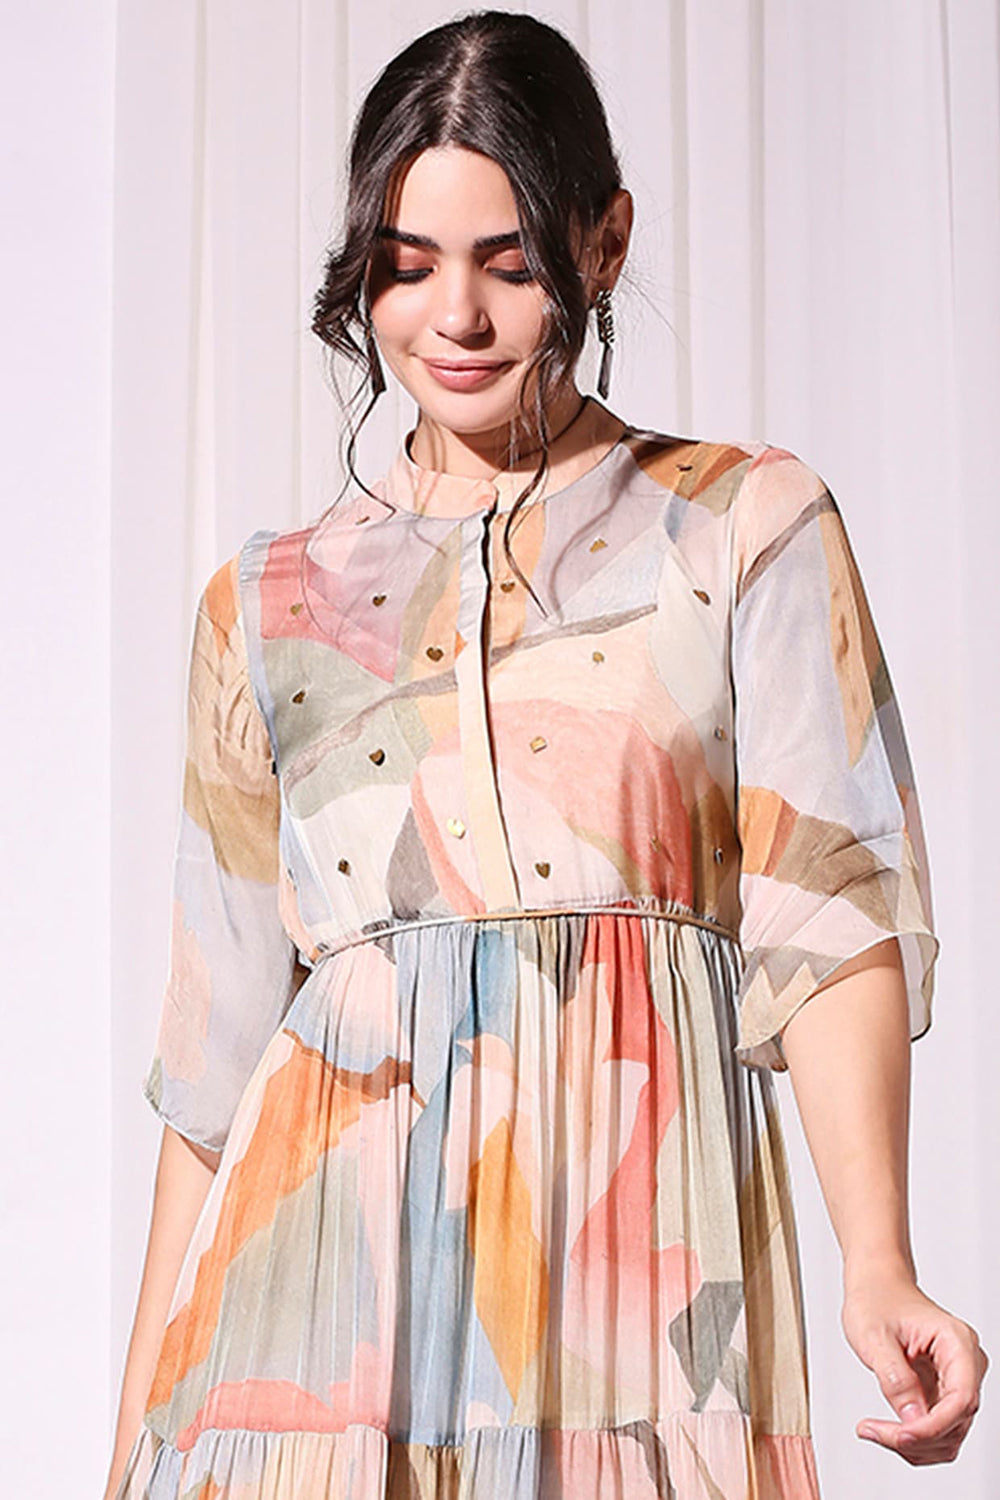 MultiColored Conversational Printed Tiered Dress